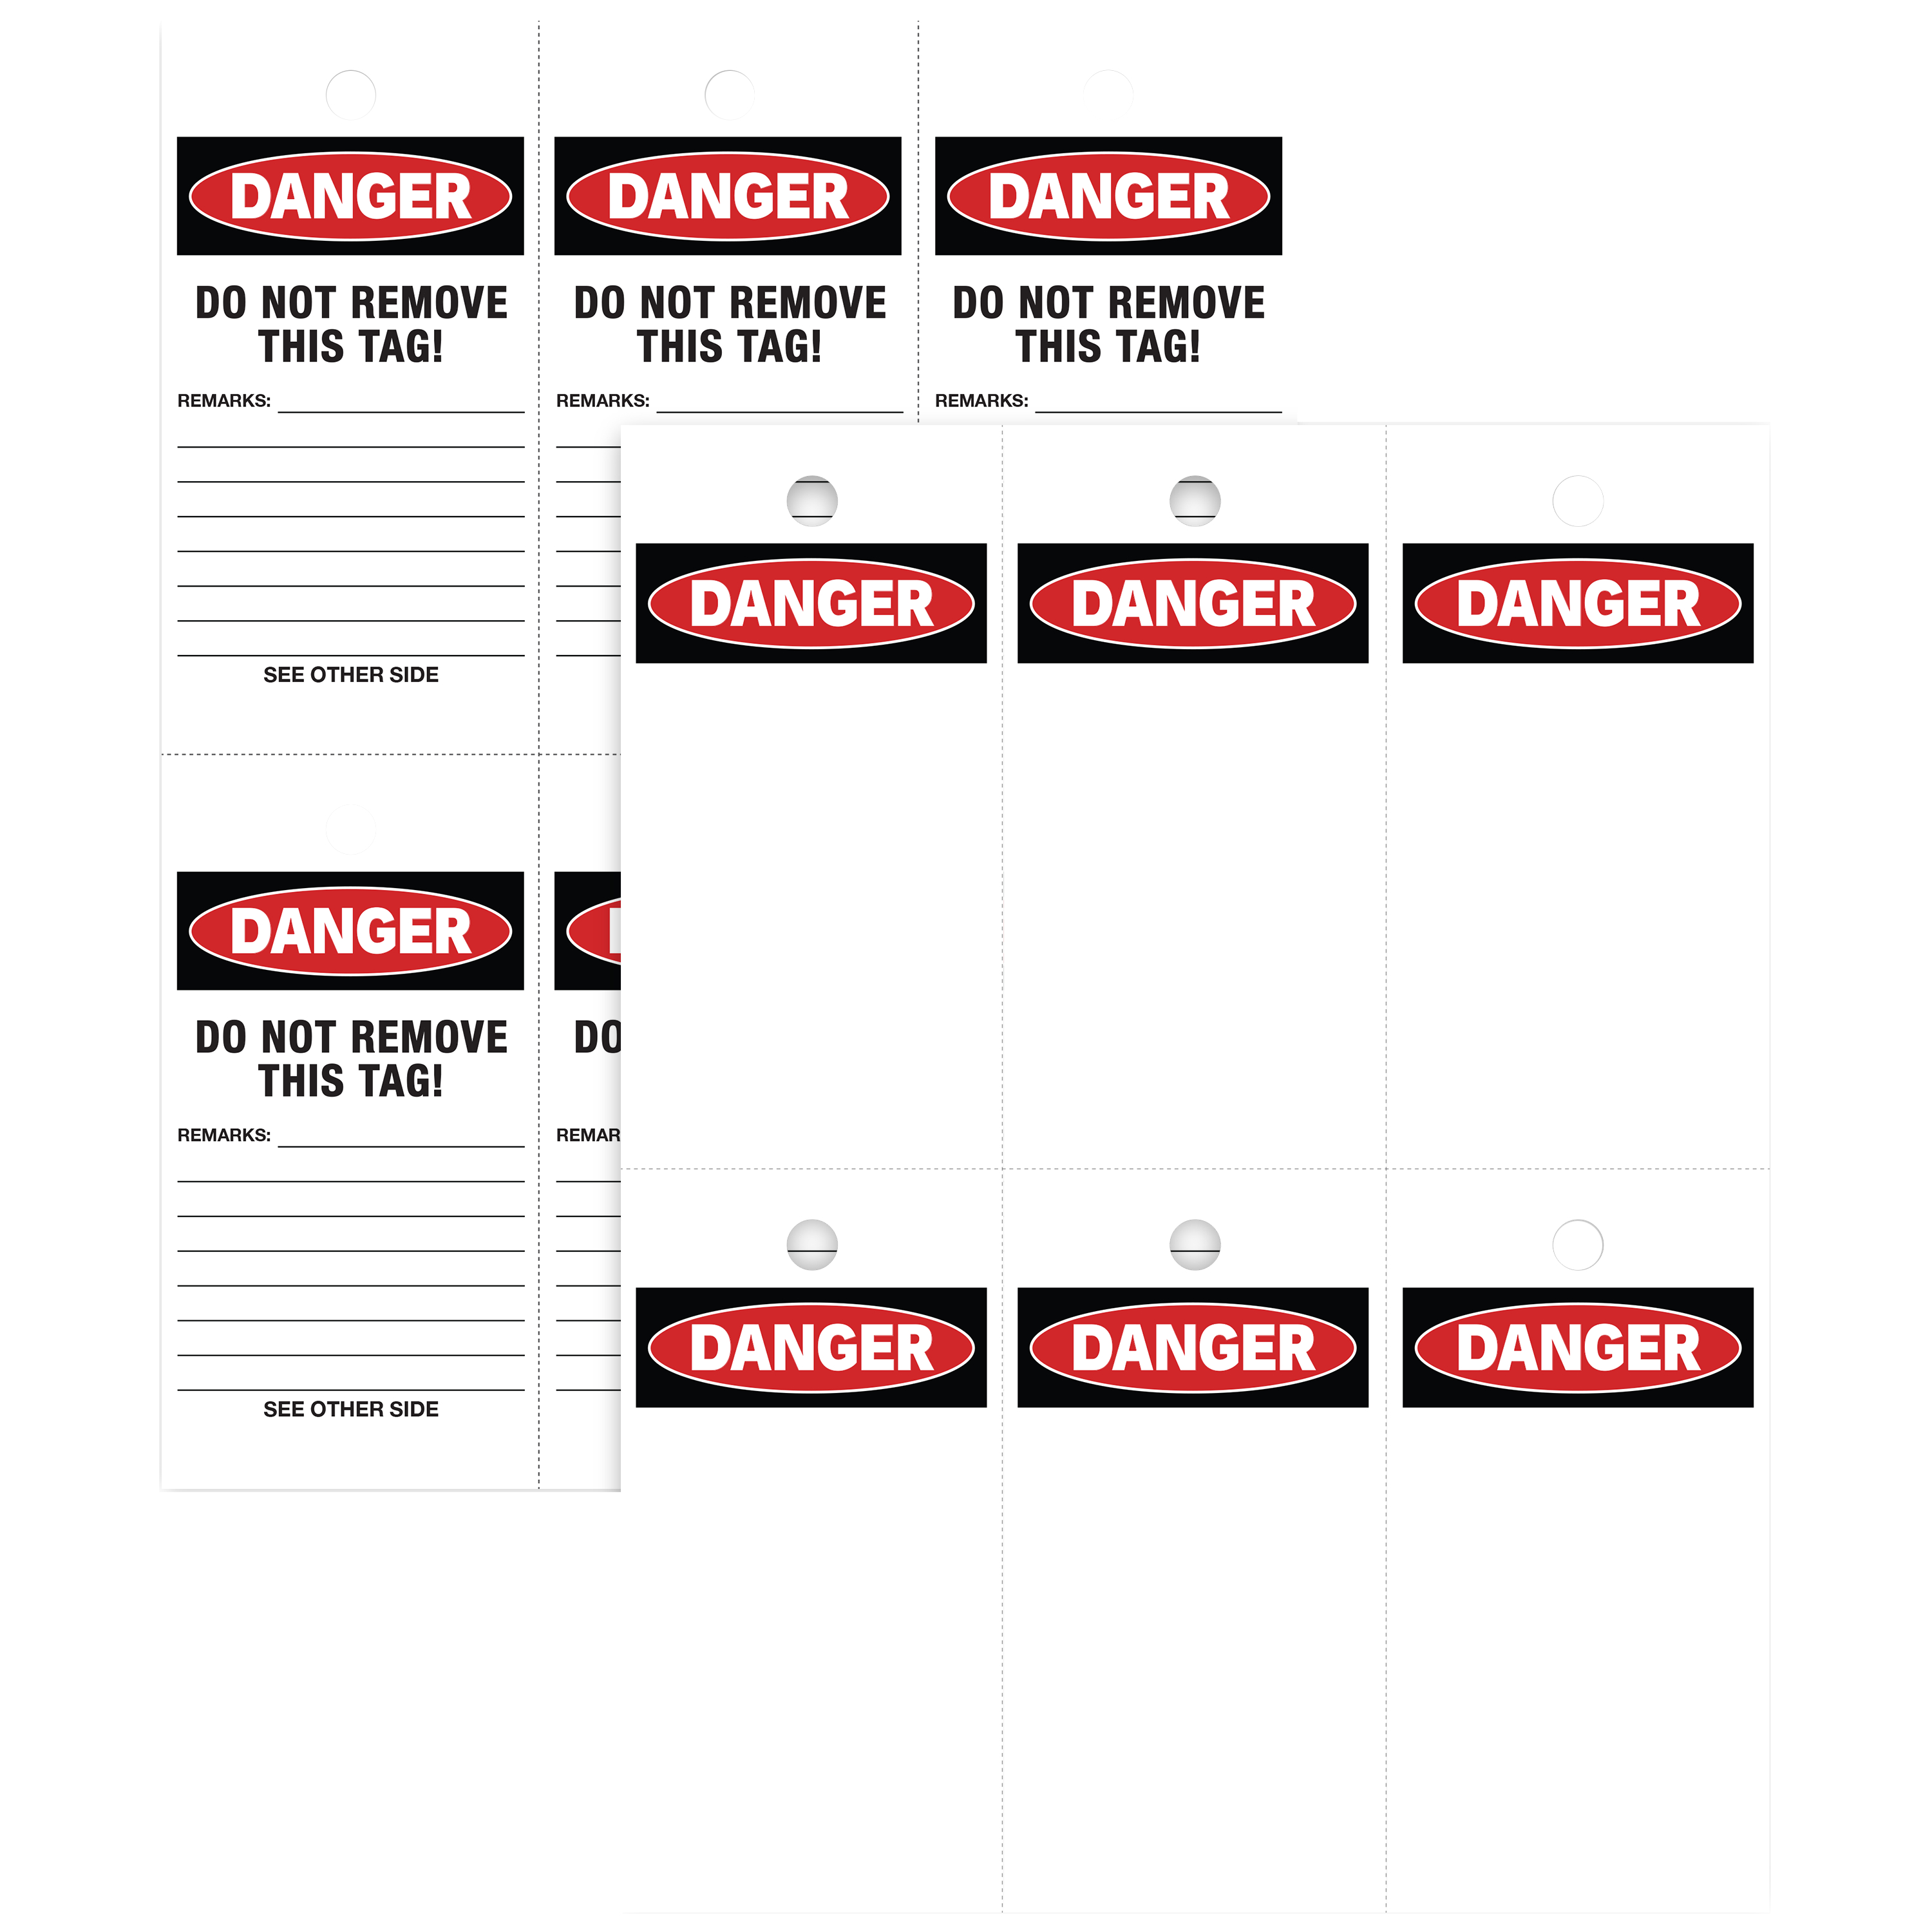 An image showing an example of Avery 62401 printable safety tags how the arrive out of the package before printing. The image illustrates that there is a preprinted OSHA "Danger" header on both sides, and additional preprinted information on one side only.